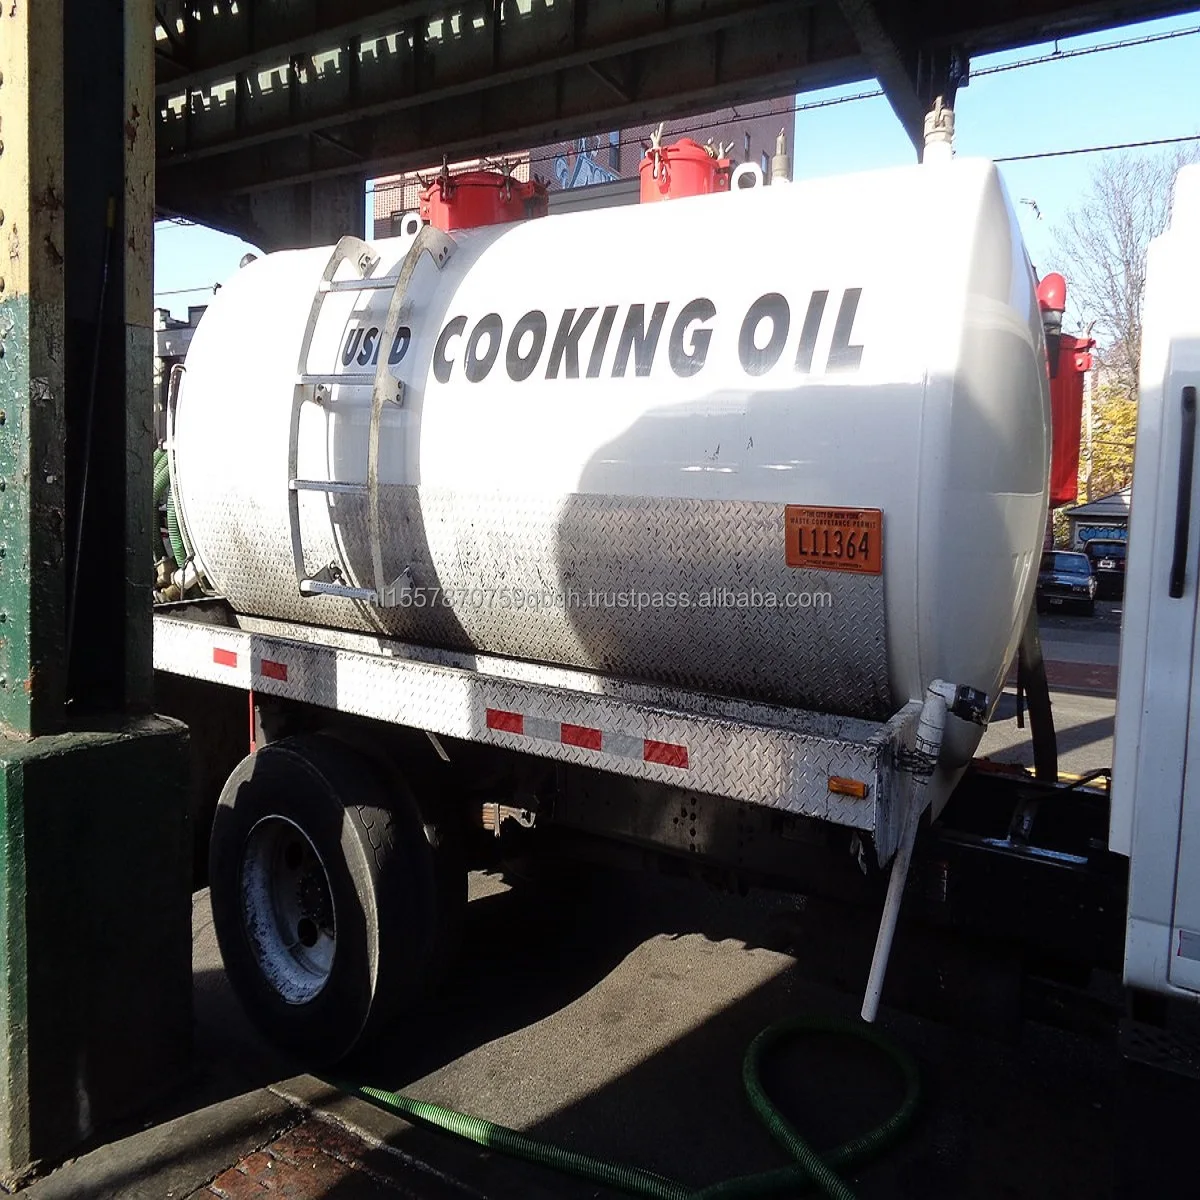 UCO for Biodiesel Well Filtered Used Cooking Oil Used Vegetable Oil Waste Recycled Used Cooking Oil For Biodeisel